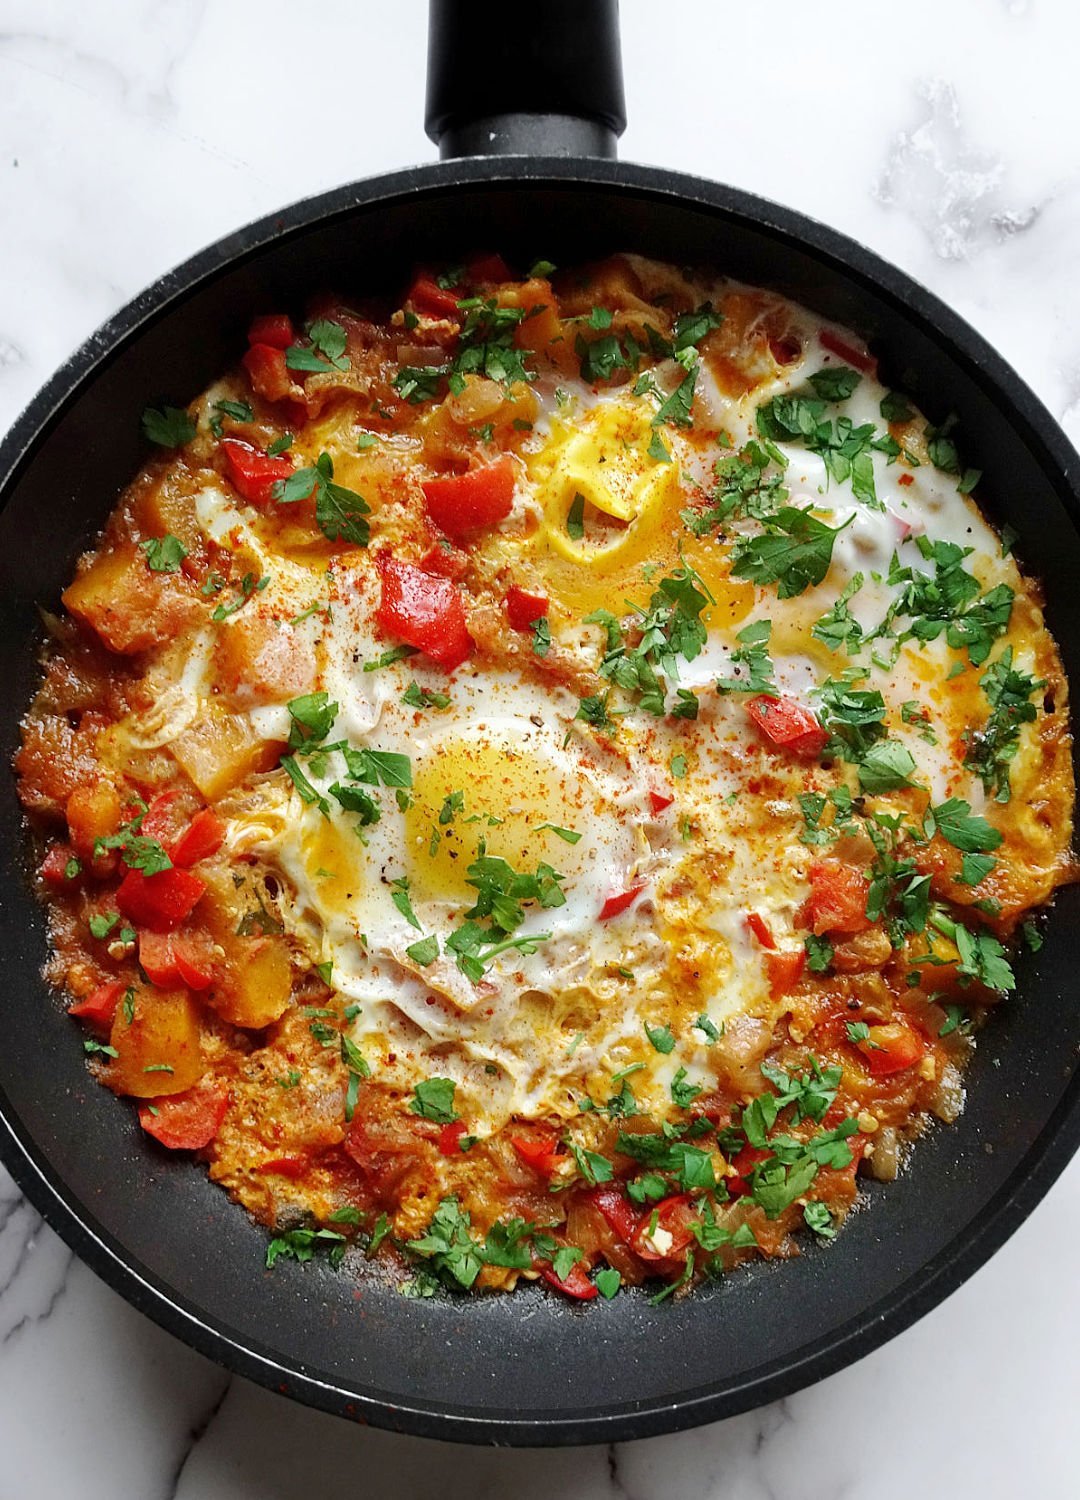 A large frying pan holds some pisto with eggs sprinkled with some fresh chopped parsley